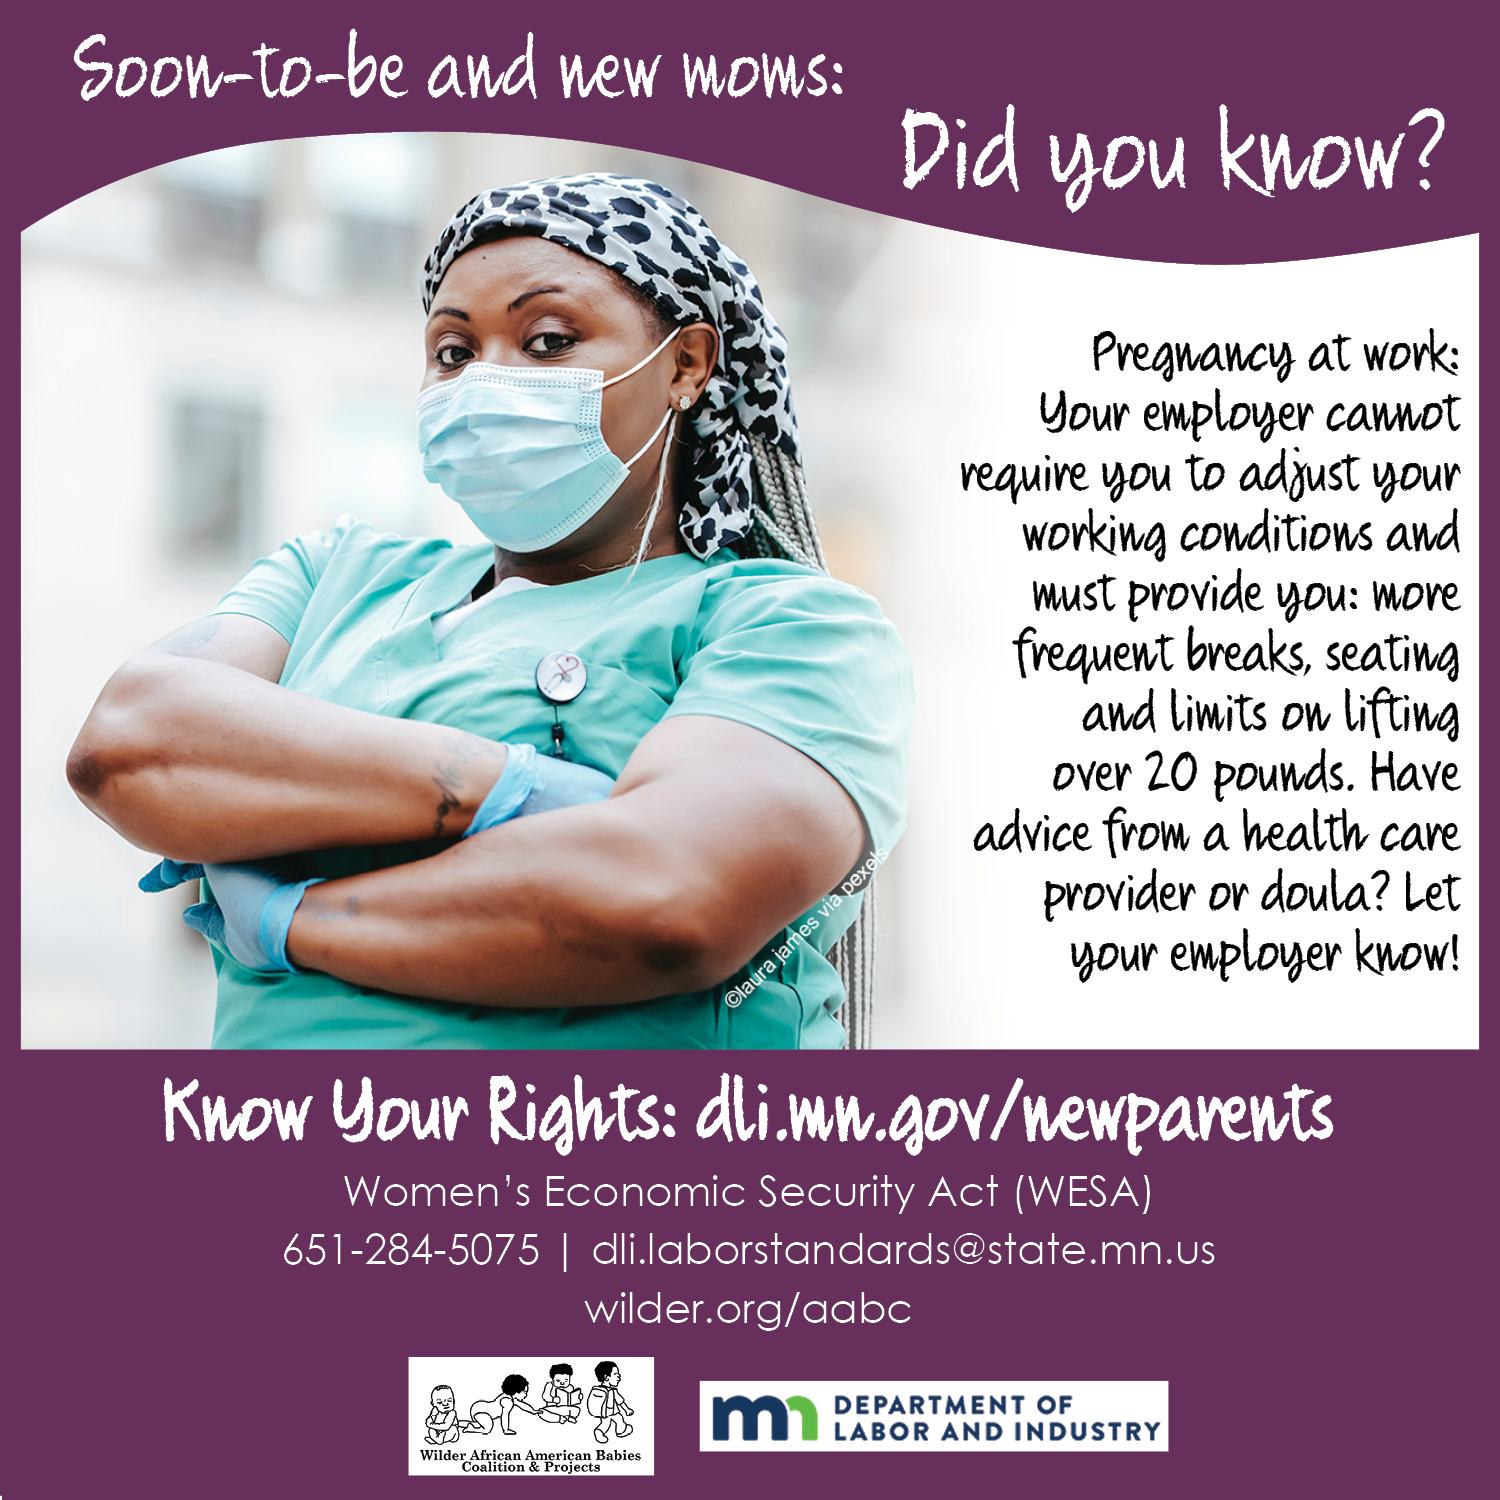 New Parents: Know Your Rights in the Workplace Women's Economic Security Act by MN Department of Labor and Industry and Wilder's African American Babies Coalition and Projects